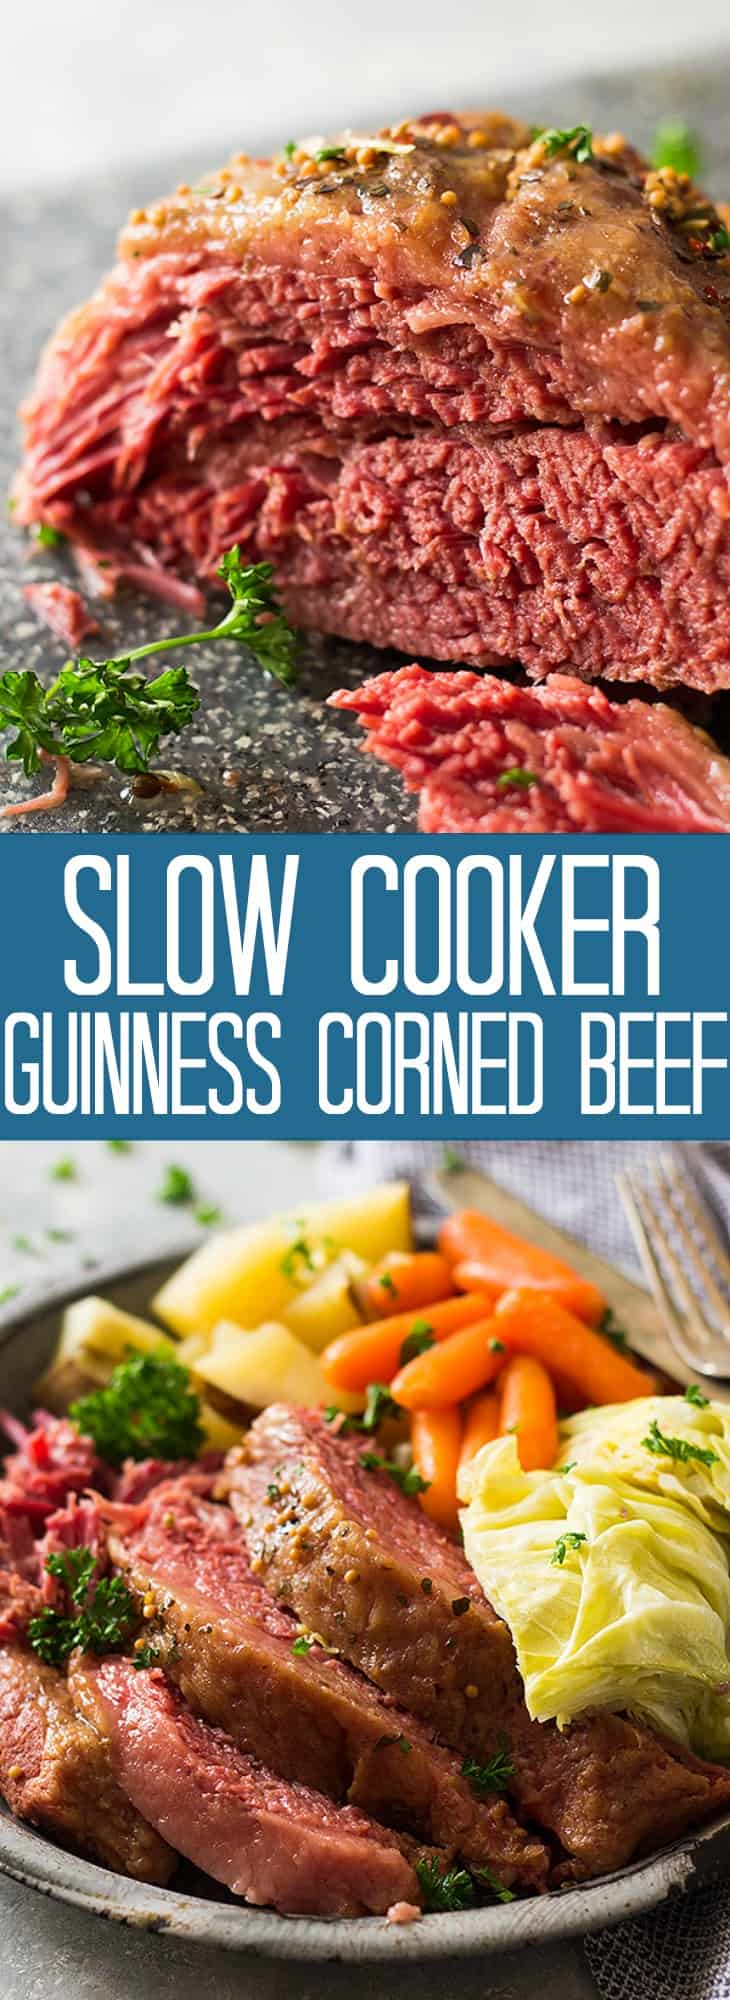 Slow Cooker Guinness Corned Beef | Countryside Cravings